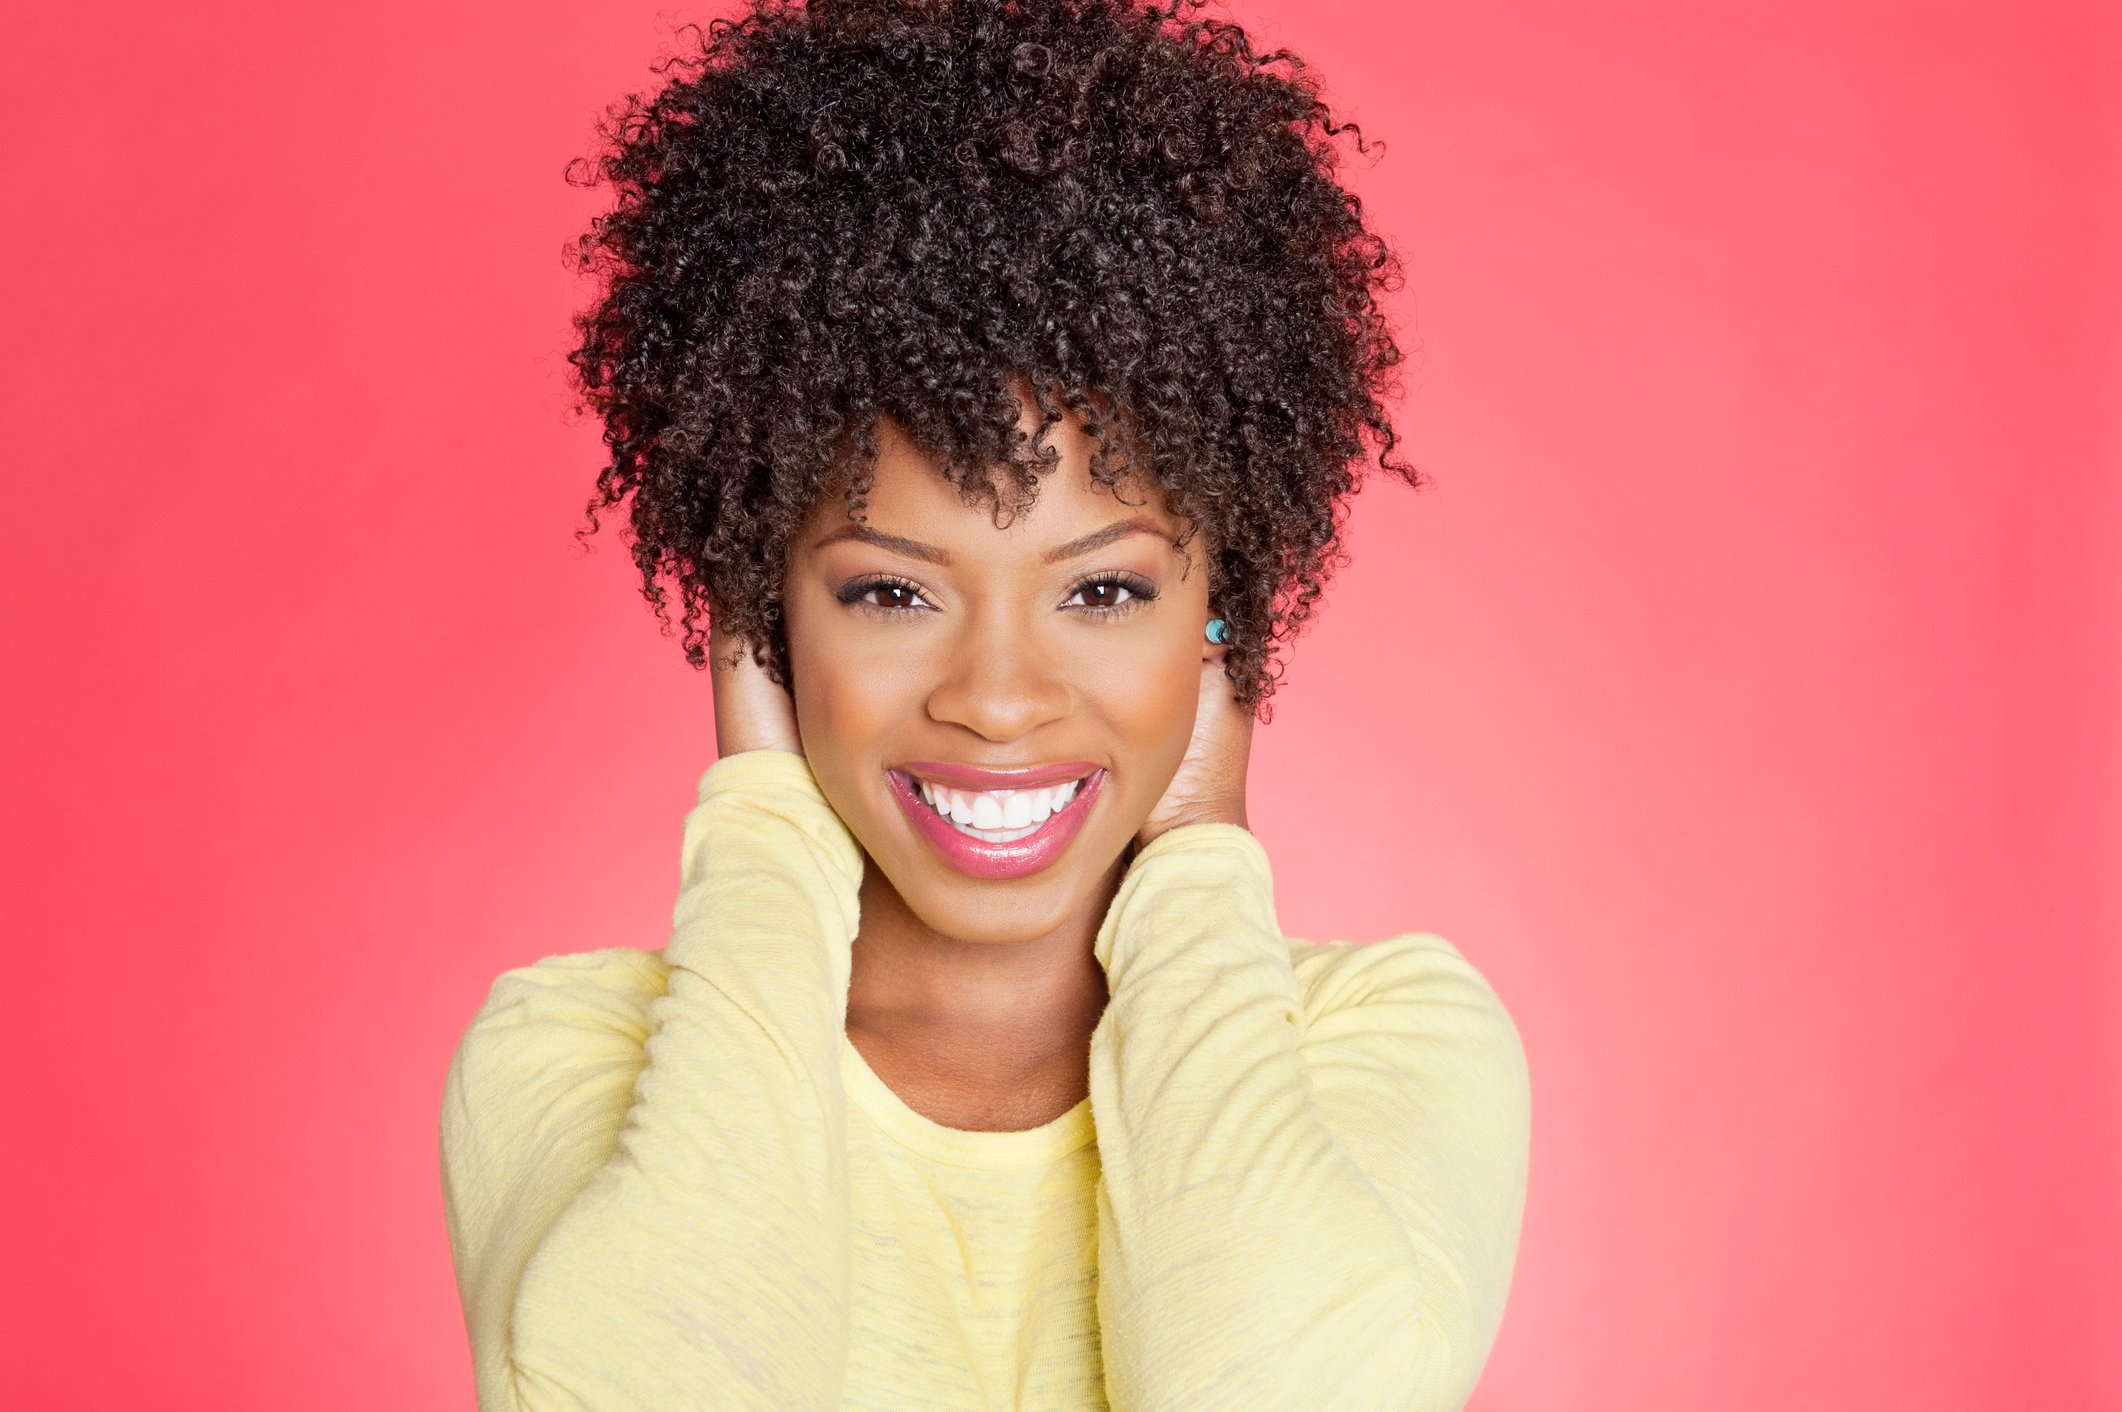 Short curly hair: hairstyles you don't want to miss